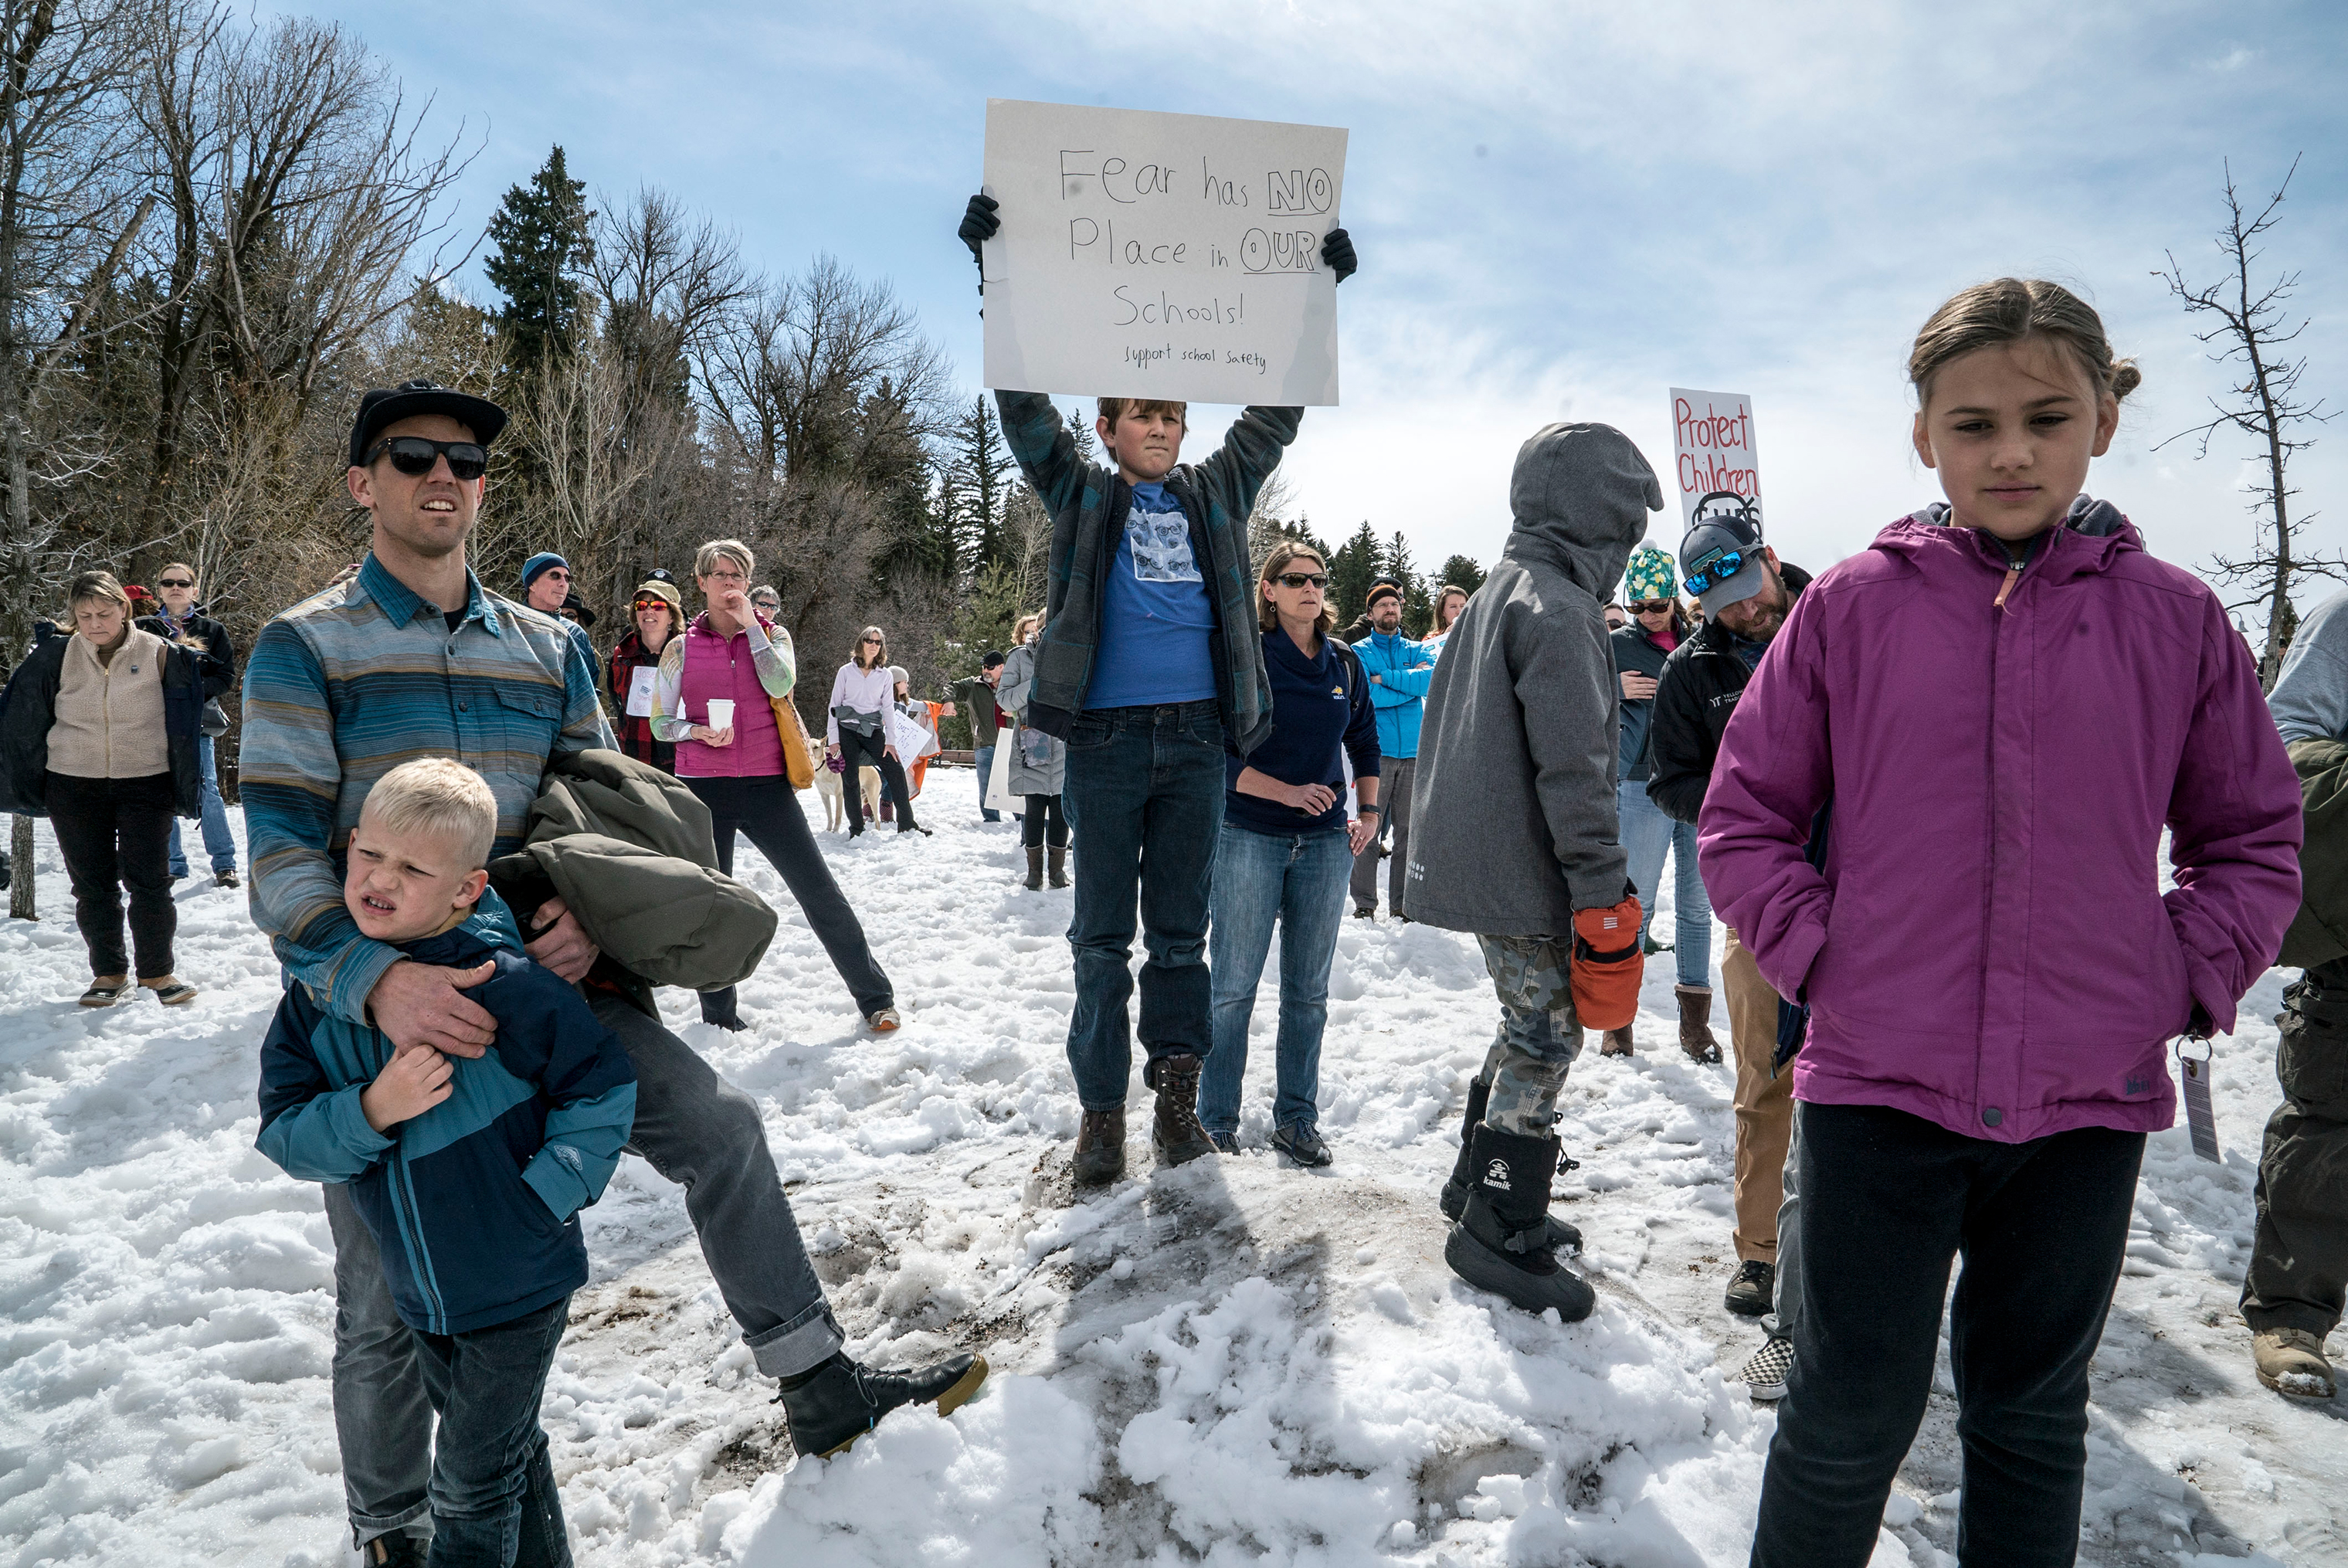 The march in Bozeman, Montana, began at the Gallatin County Courthouse and went to the lawn of the Bozeman Public Library, where speeches were delivered by community members and students. (Paul Moakley for TIME)